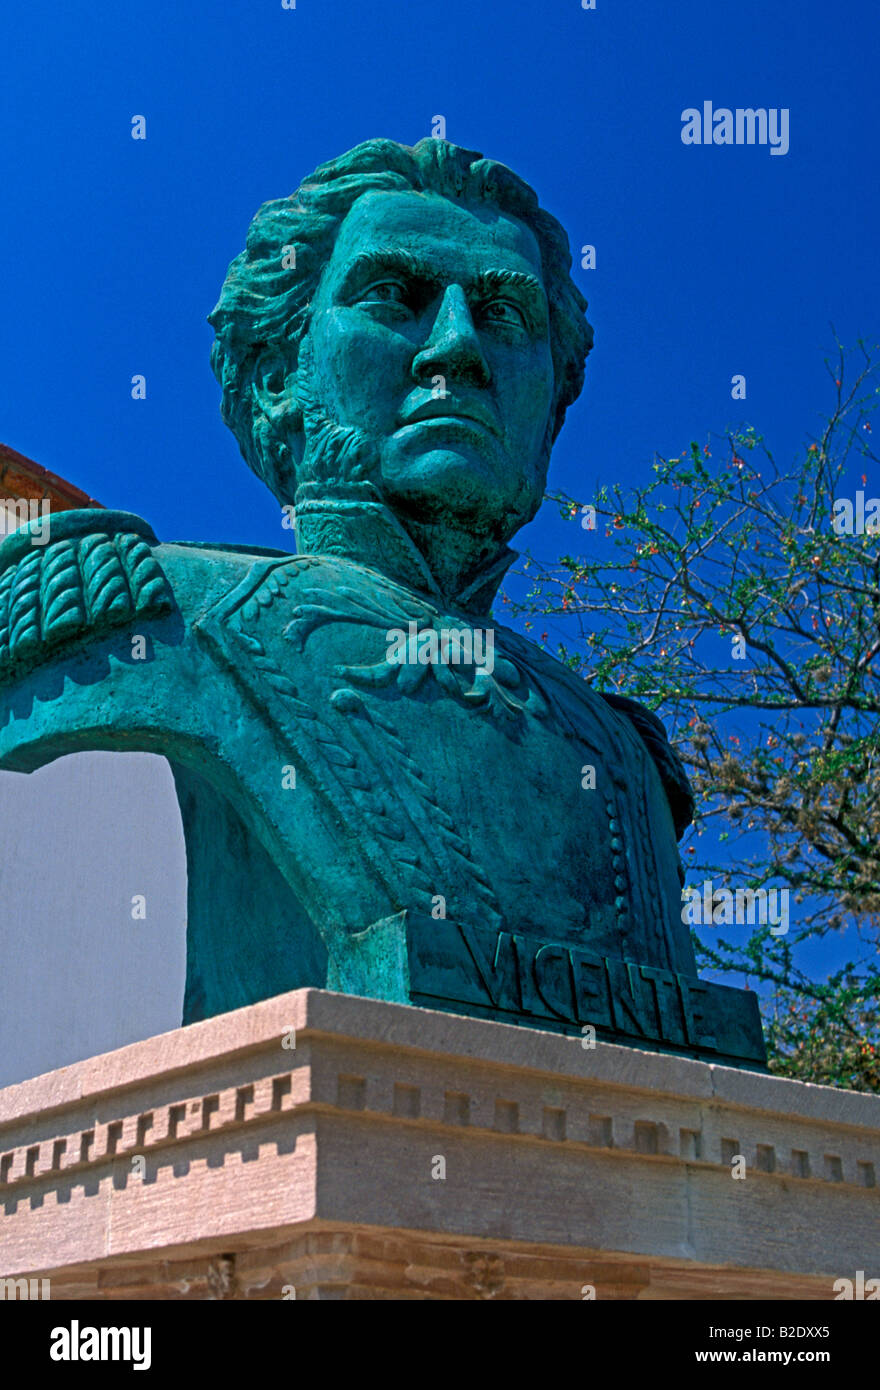 bust of General Vicente Guerrero, bust, General Vicente Guerrero, Vicente Guerrero, Cuilapam de Guerrero, Oaxaca State, Mexico Stock Photo